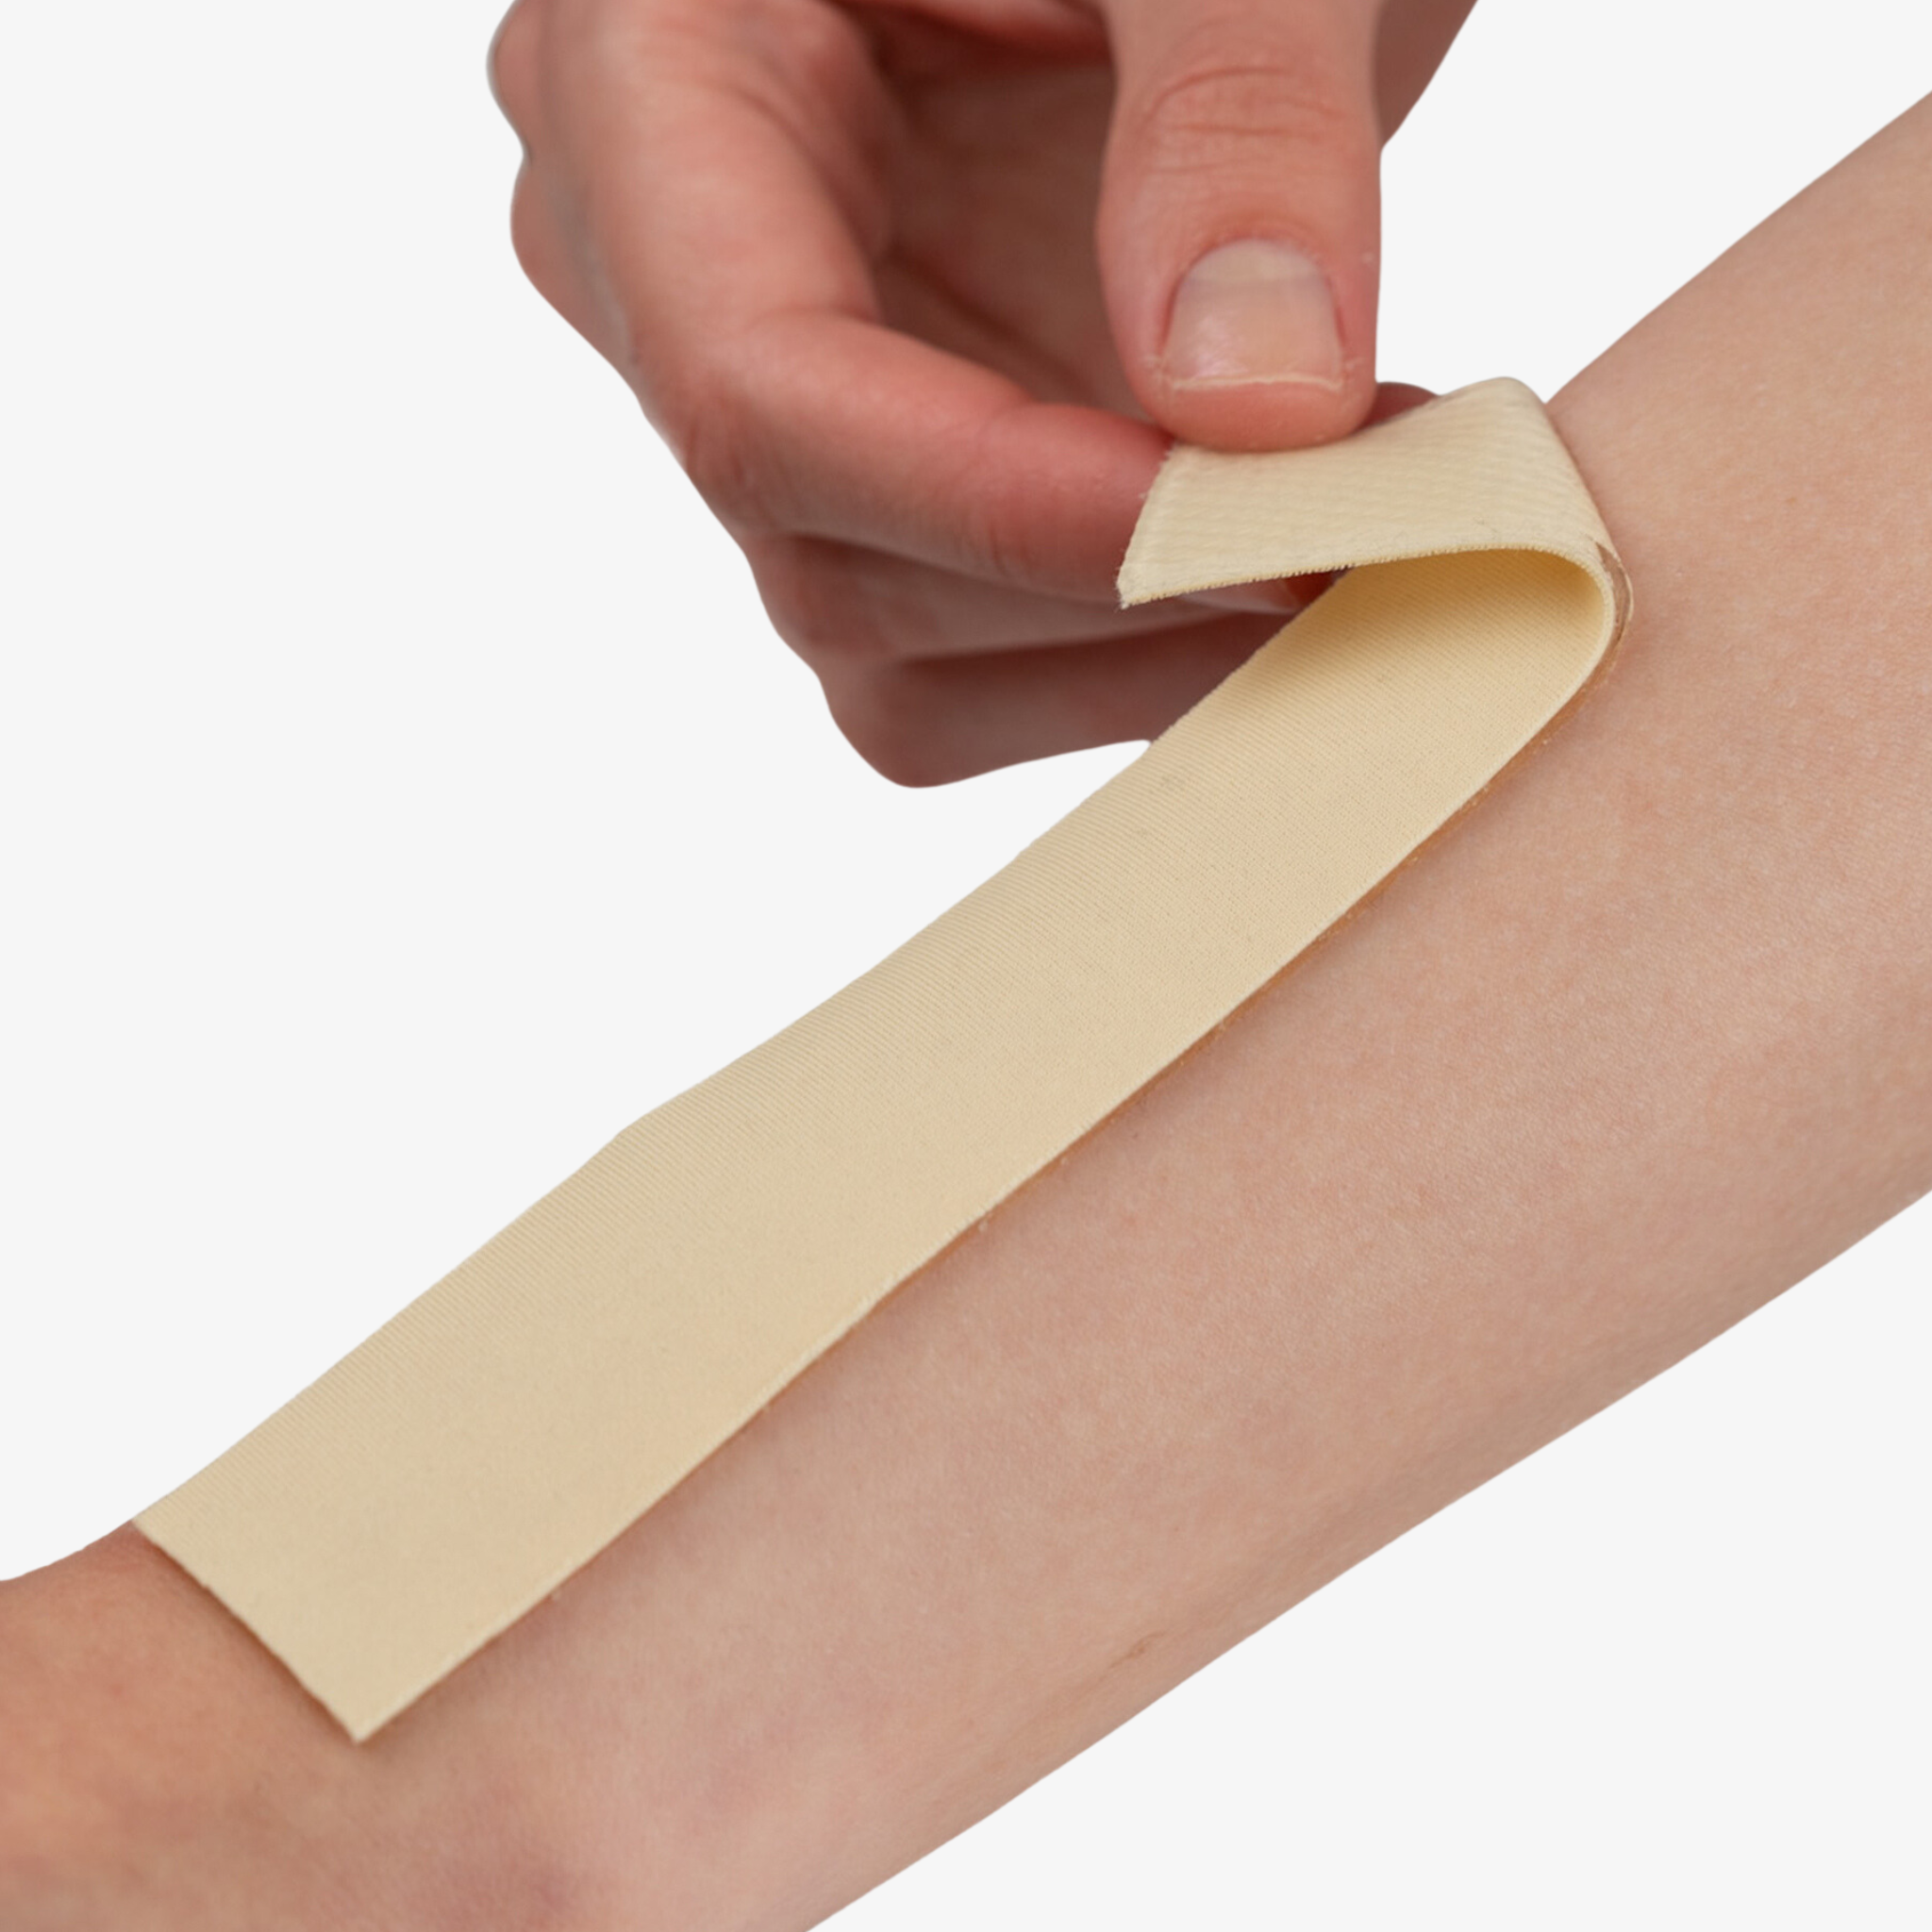 Advanced Medical-Grade Silicone Sheet Areola 1" x 6" strips on caucasian women's arm | beige